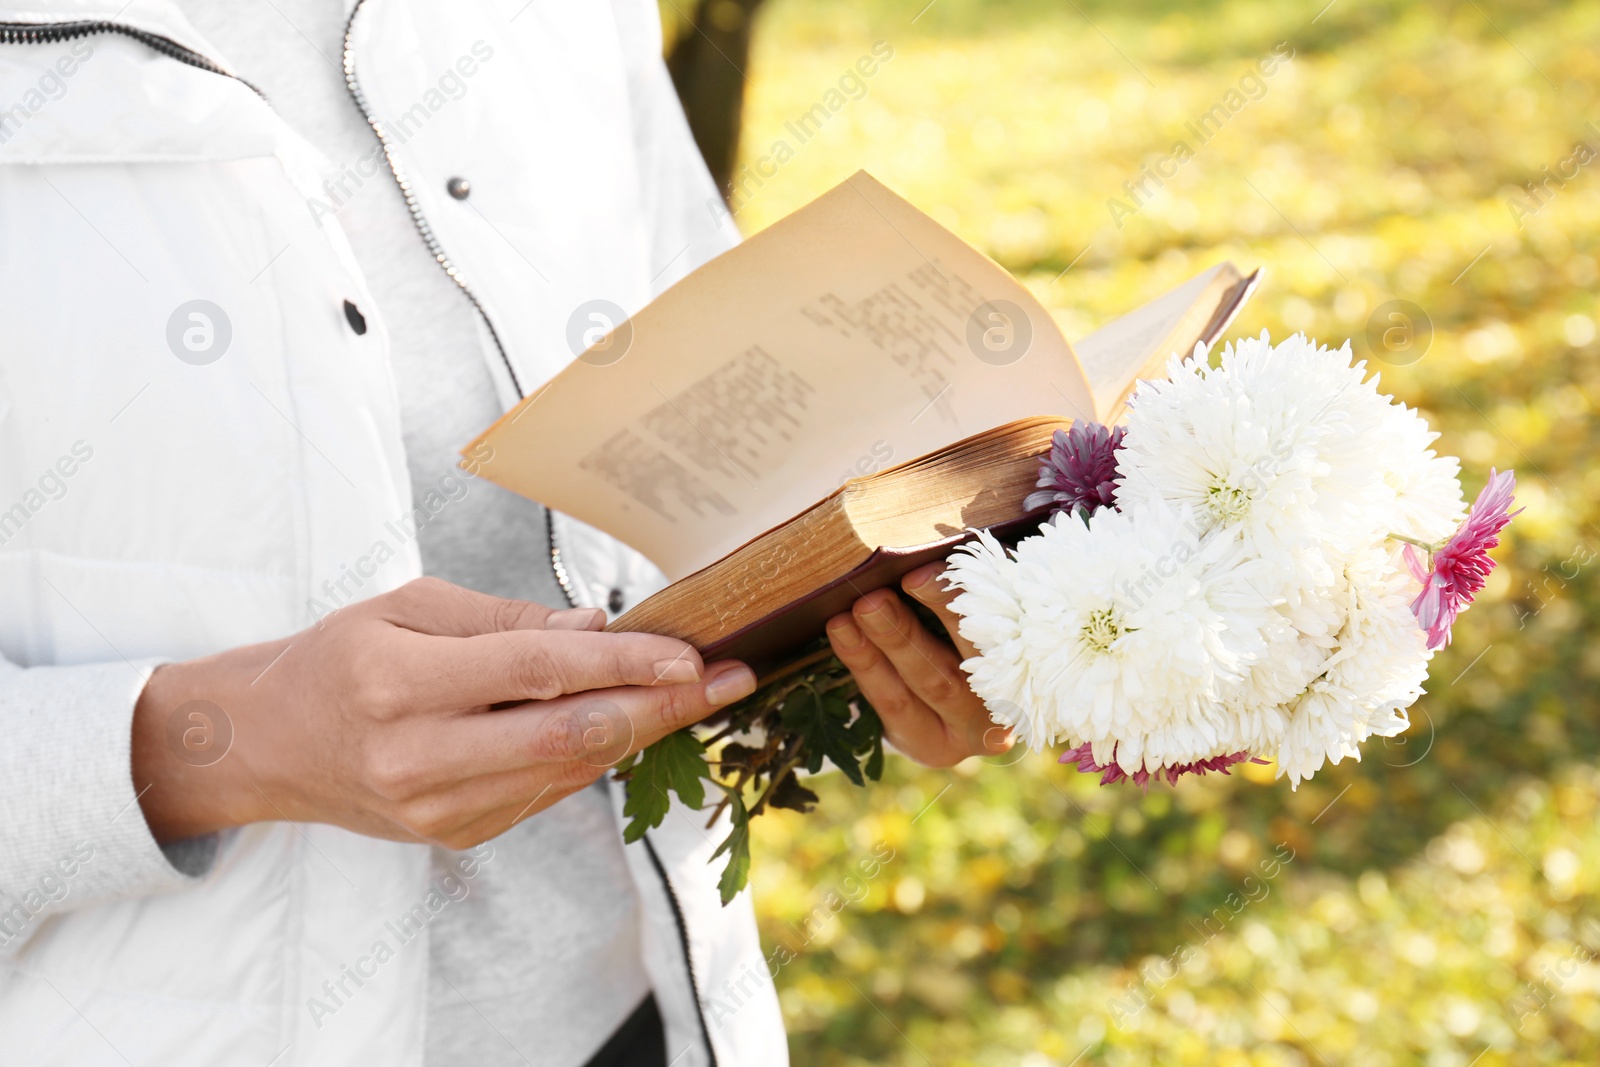 Photo of Woman reading book and holding beautiful flowers outdoors on autumn day, closeup